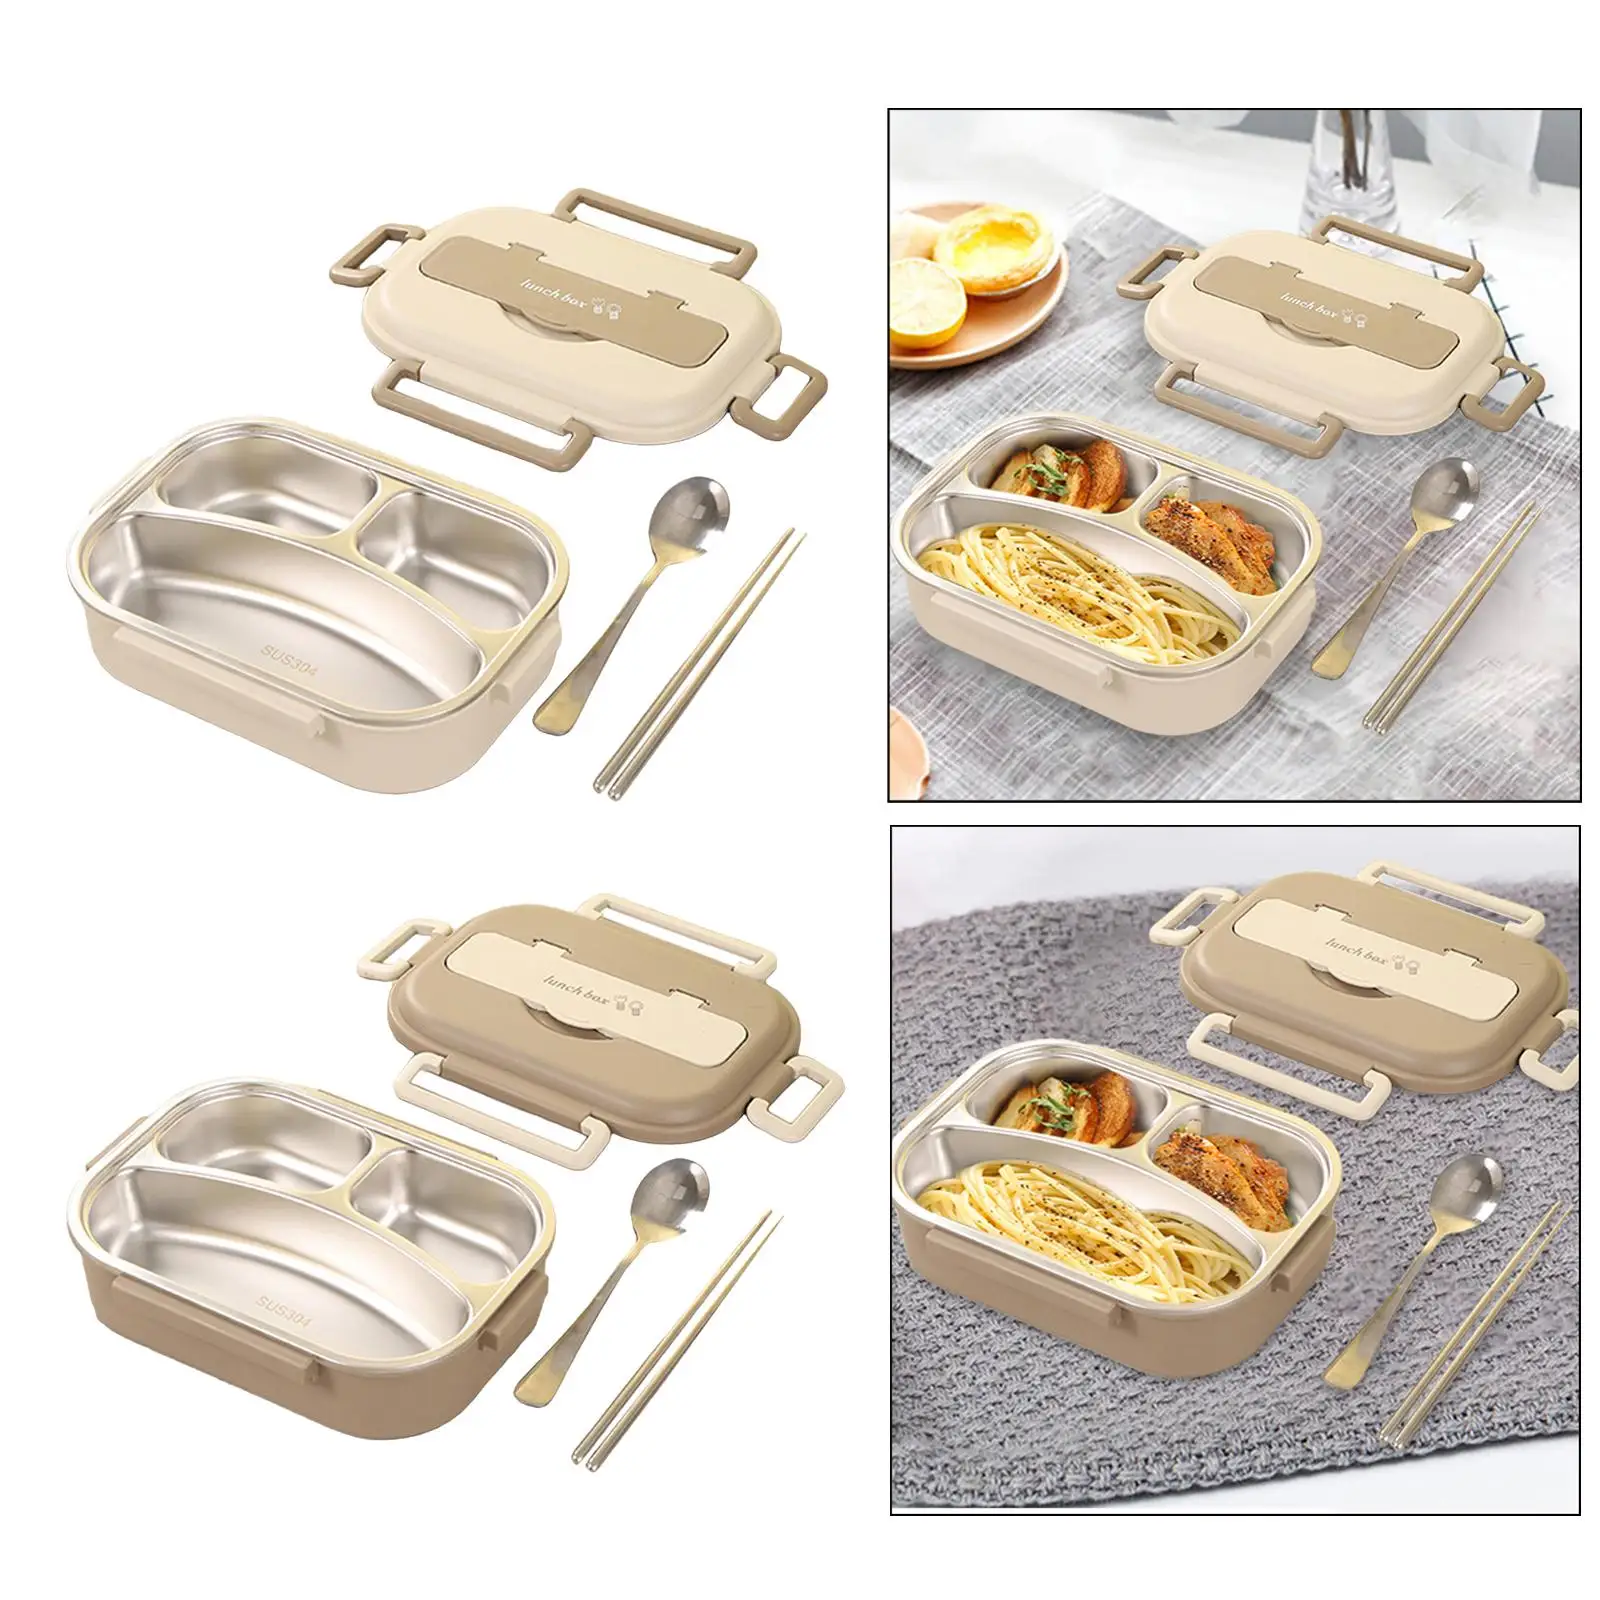 Stainless Steel Bento Box 4 Sided Lock Leakproof Multi Purpose 1L Storage Container for Camping Home Travel Picnic